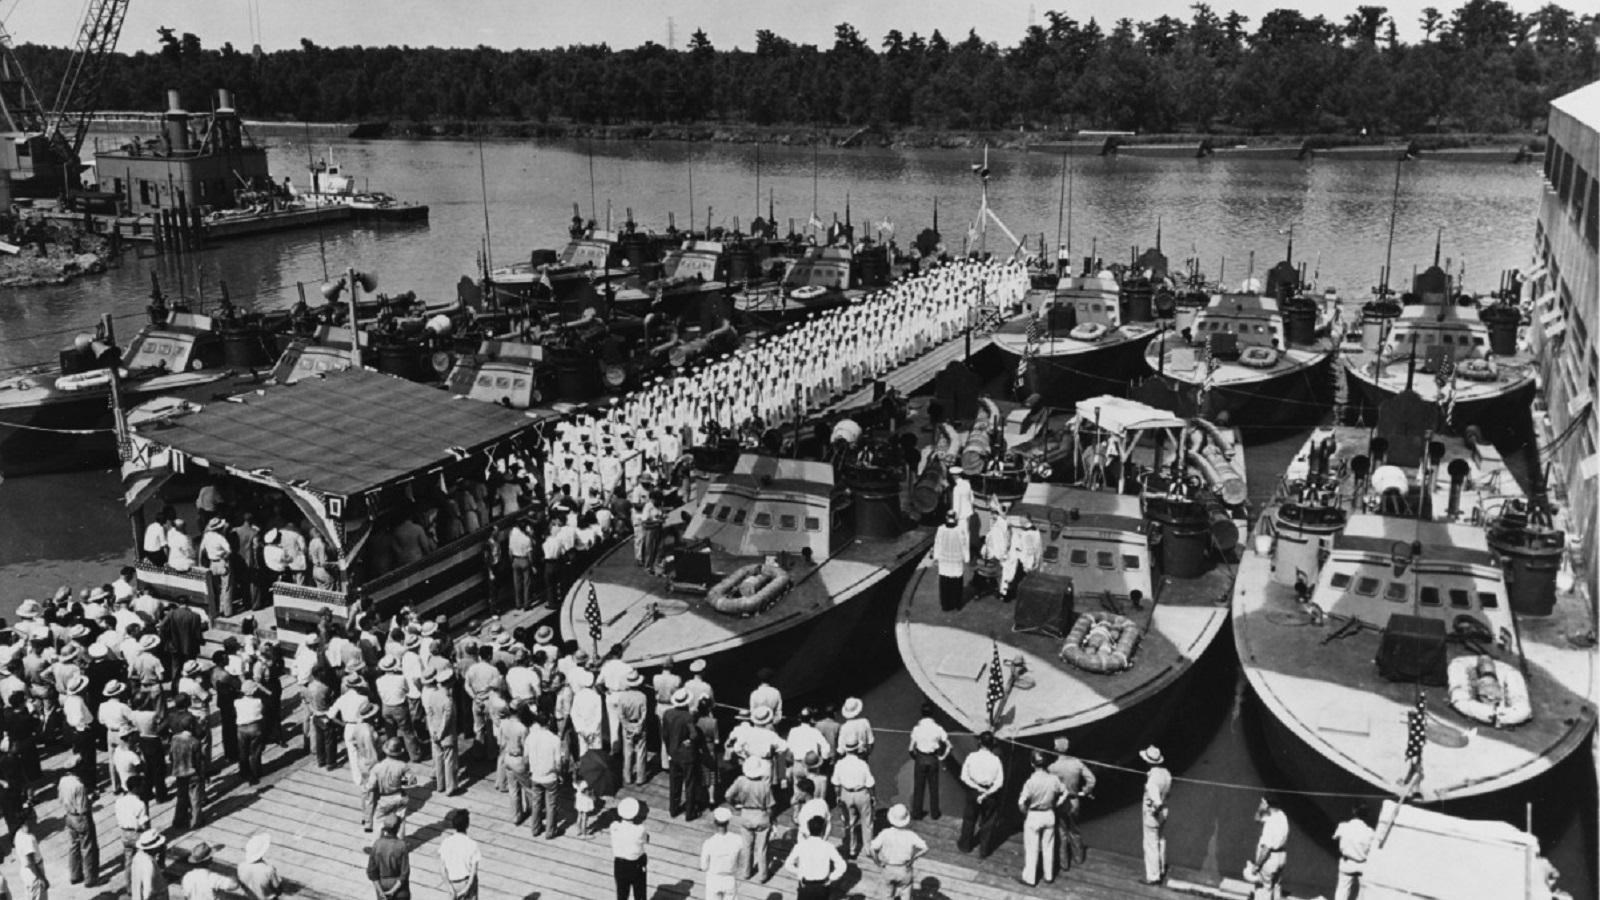 a line of boats on a dock with a crowd of people